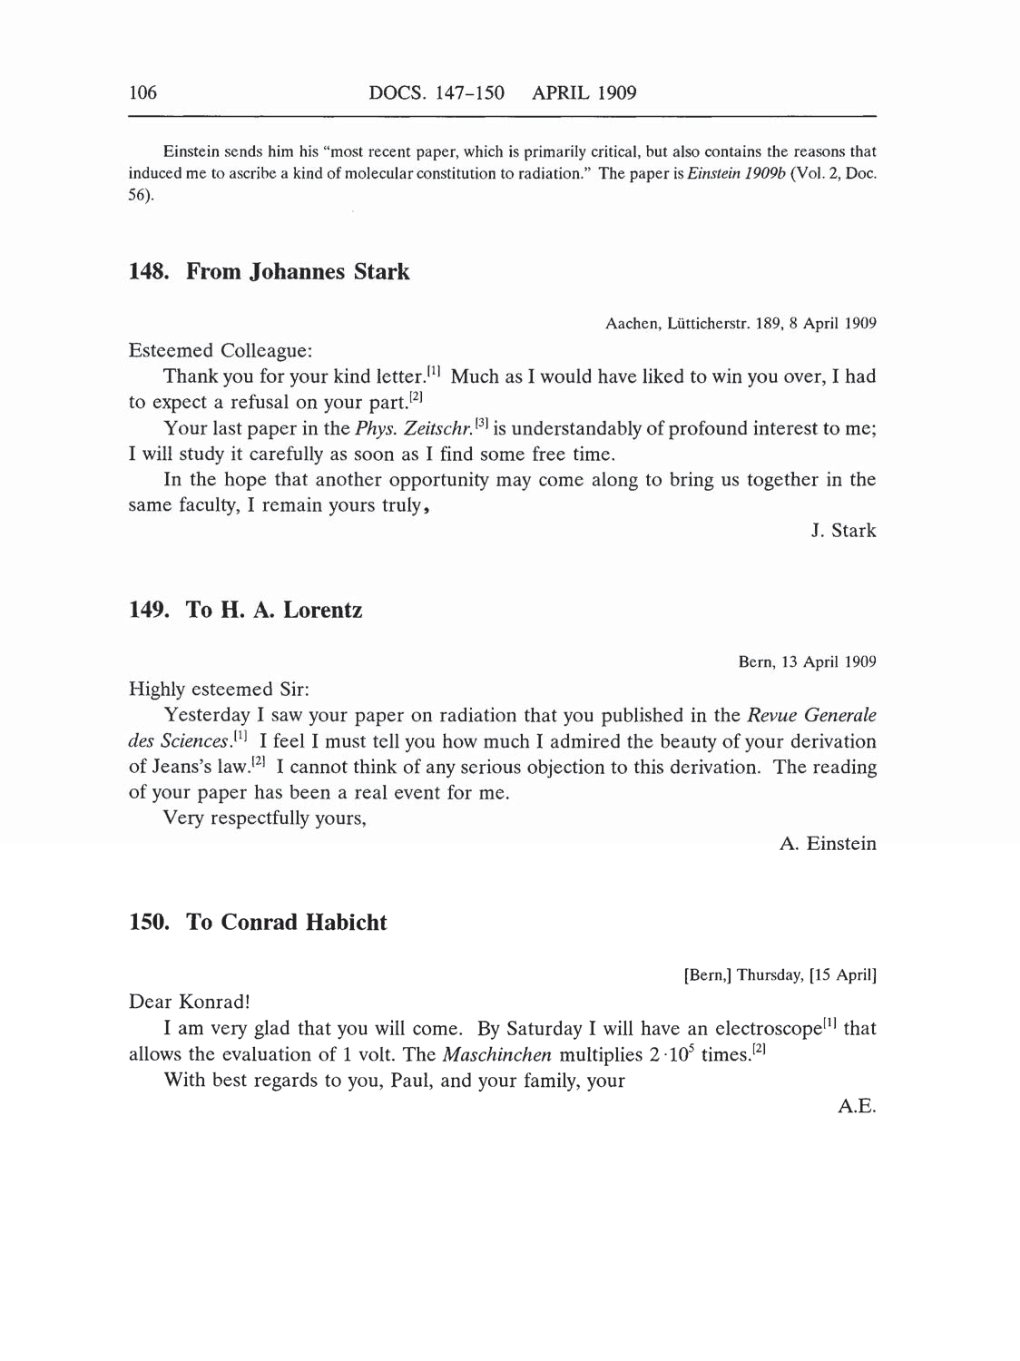 Volume 5: The Swiss Years: Correspondence, 1902-1914 (English translation supplement) page 106